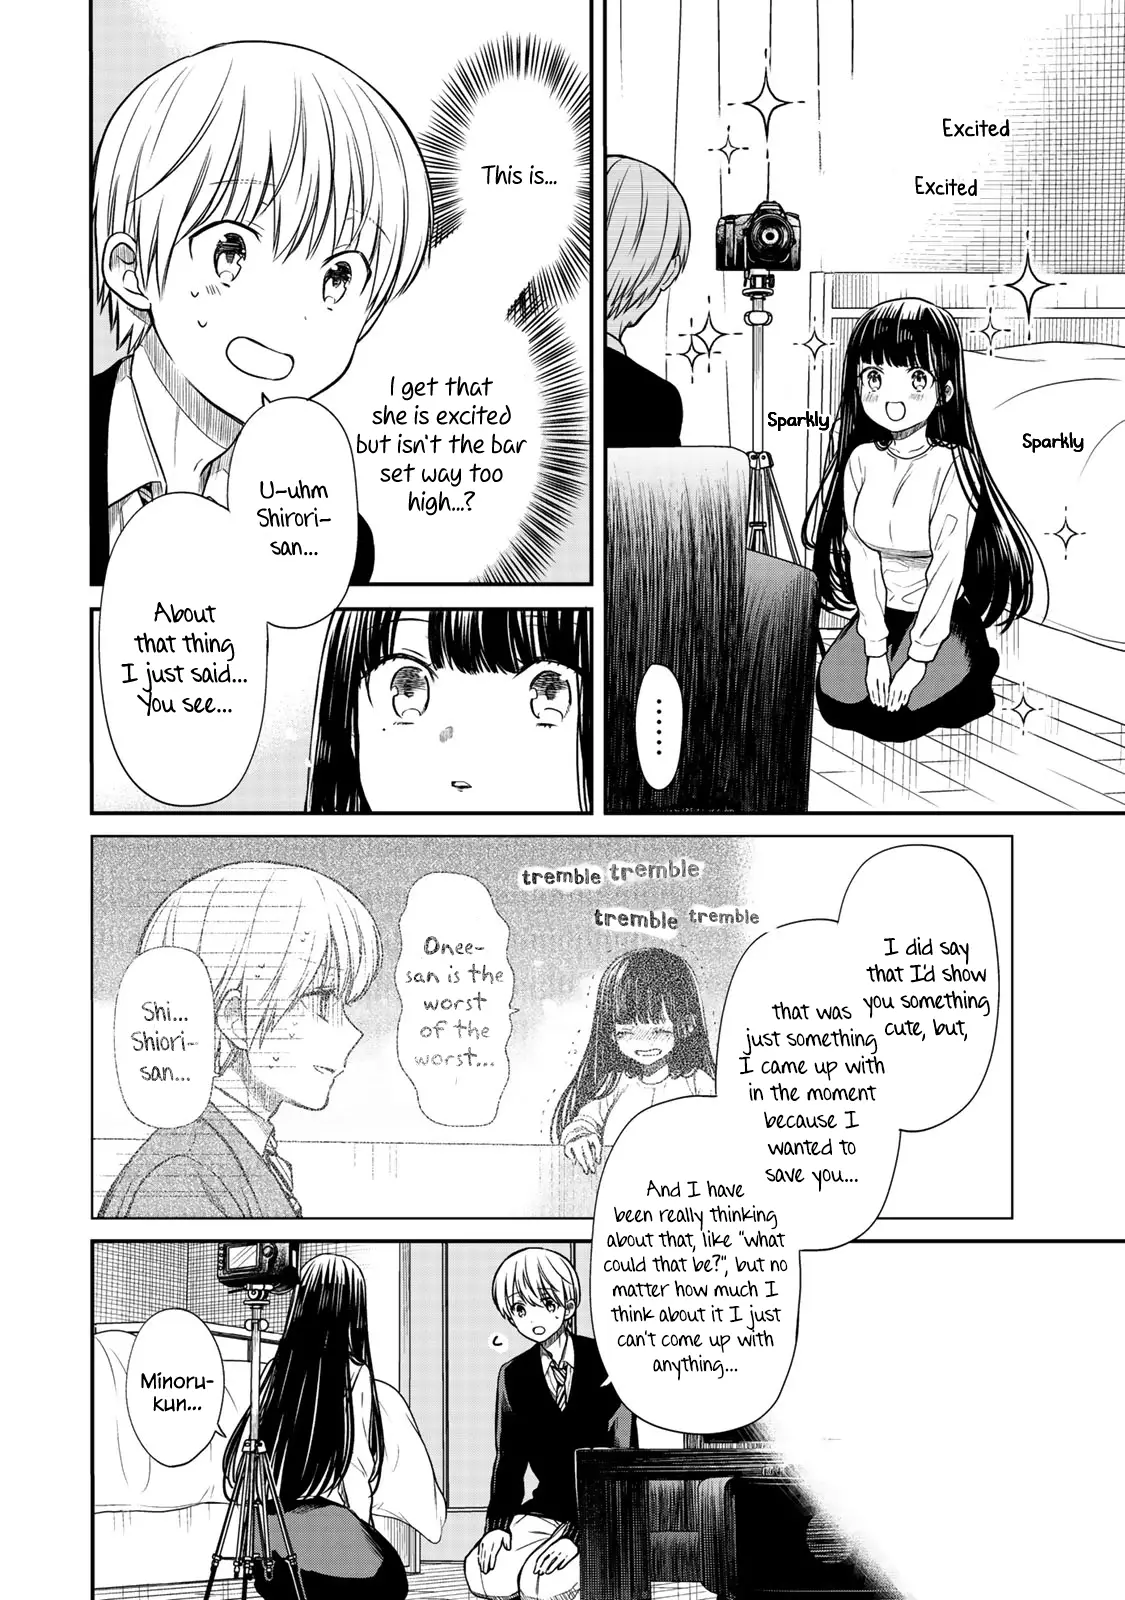 The Story Of An Onee-San Who Wants To Keep A High School Boy - 134.5 page 3